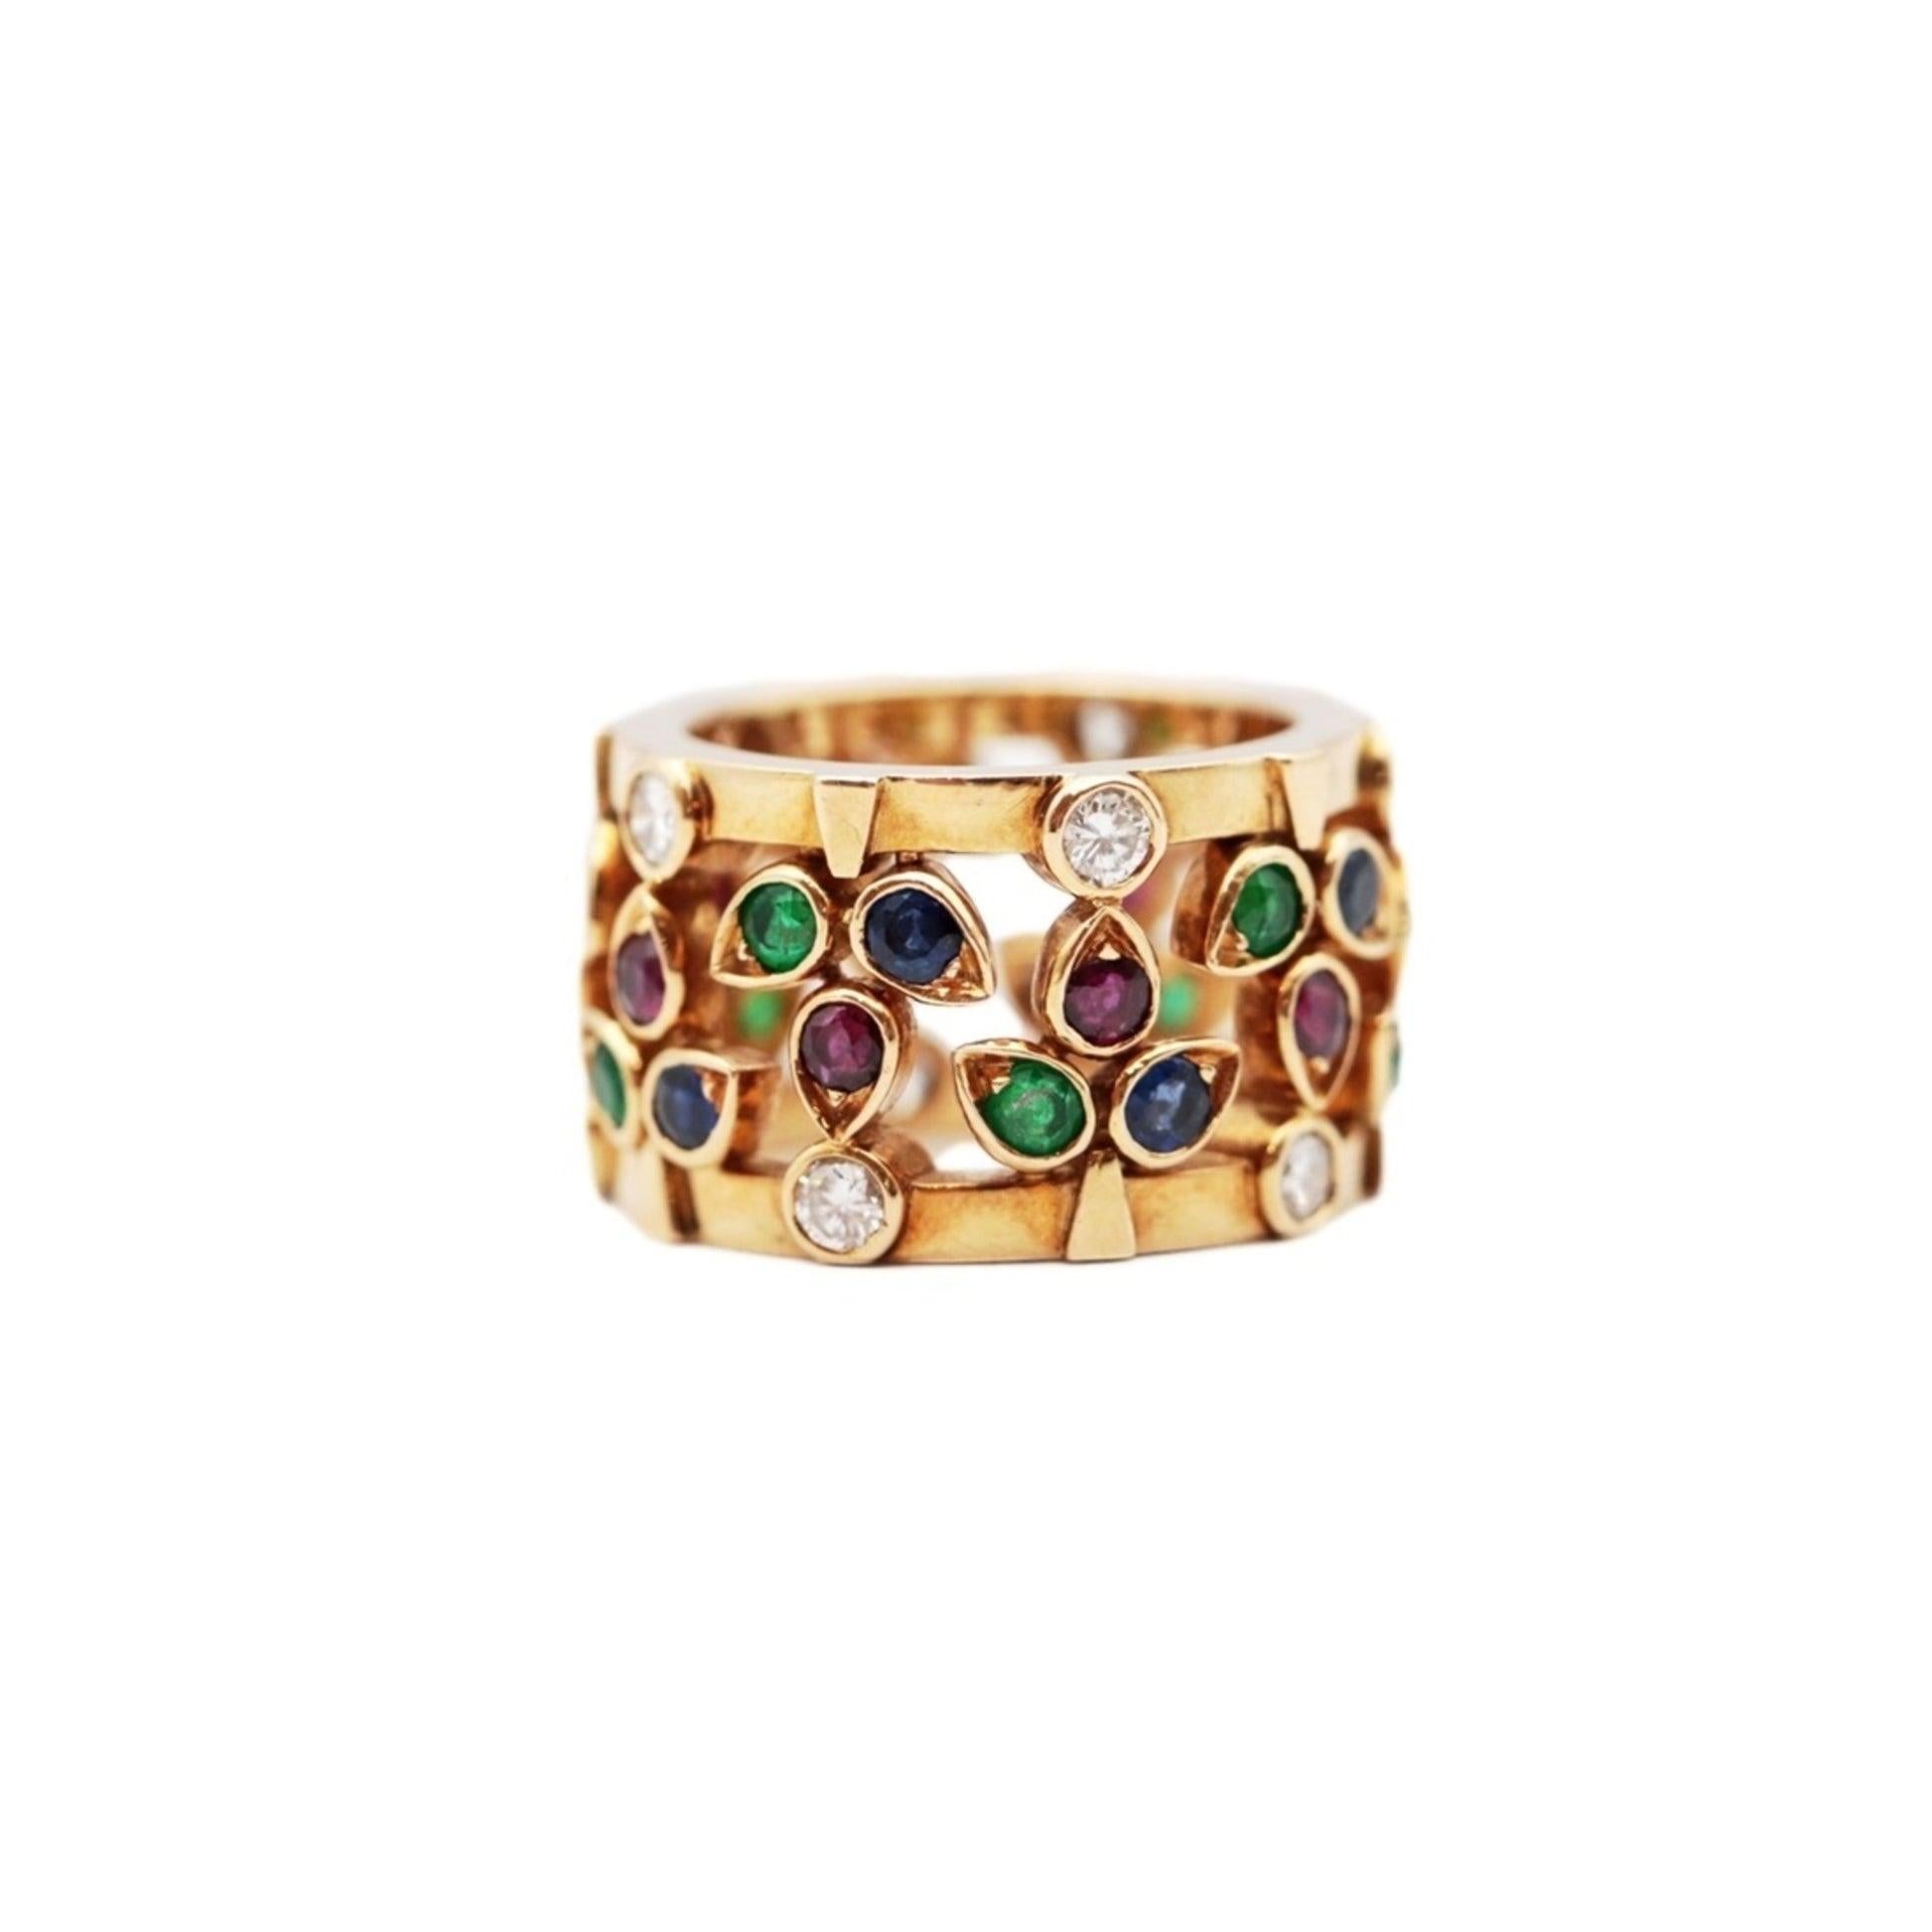 Cartier Multicolor Diamond, Emerald, Ruby, Sapphire Ring in 18K Yellow Gold For Sale 1